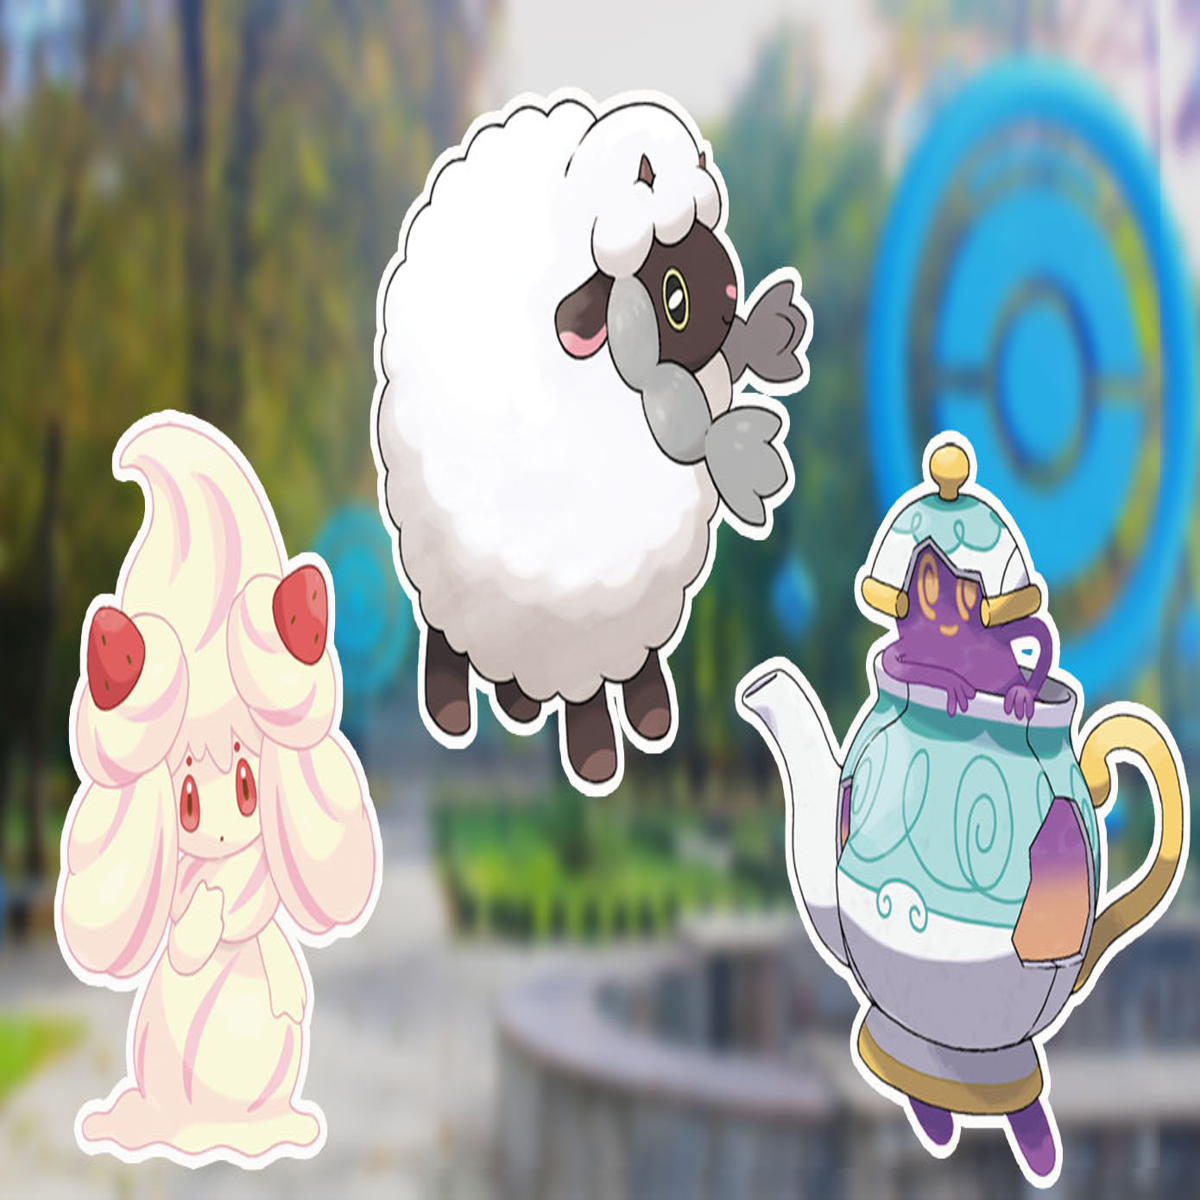 Pokémon Sword and Shield exclusives, release date, Pokedex and more